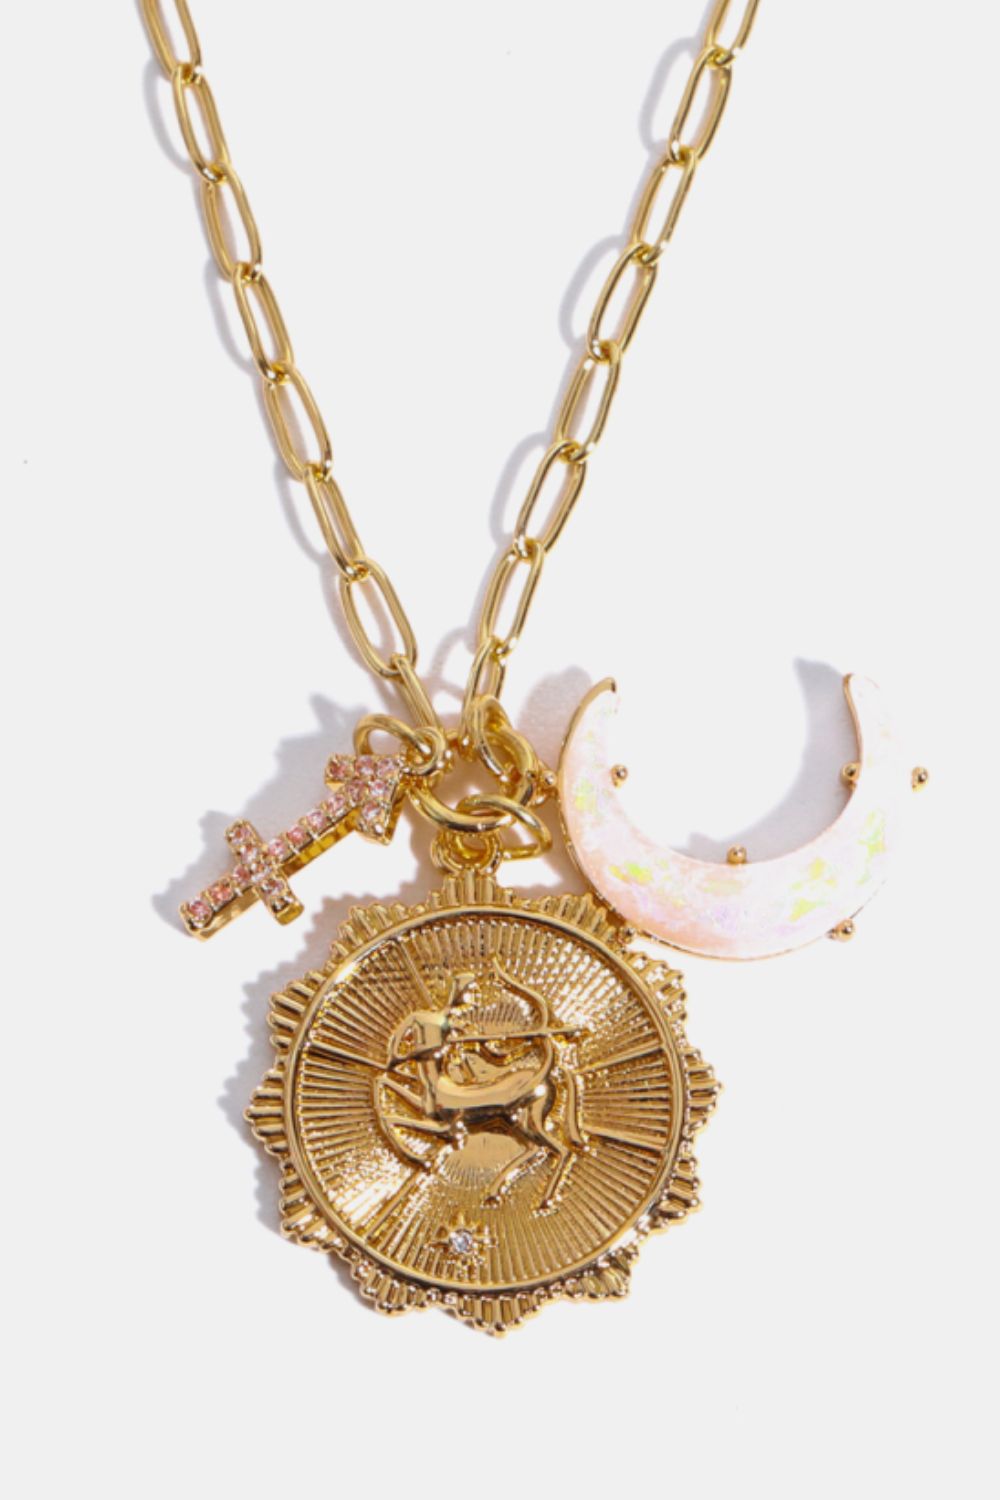 Trendsi Cupid Beauty Supplies Women Necklace Constellation and Moon Pendant Copper Necklace